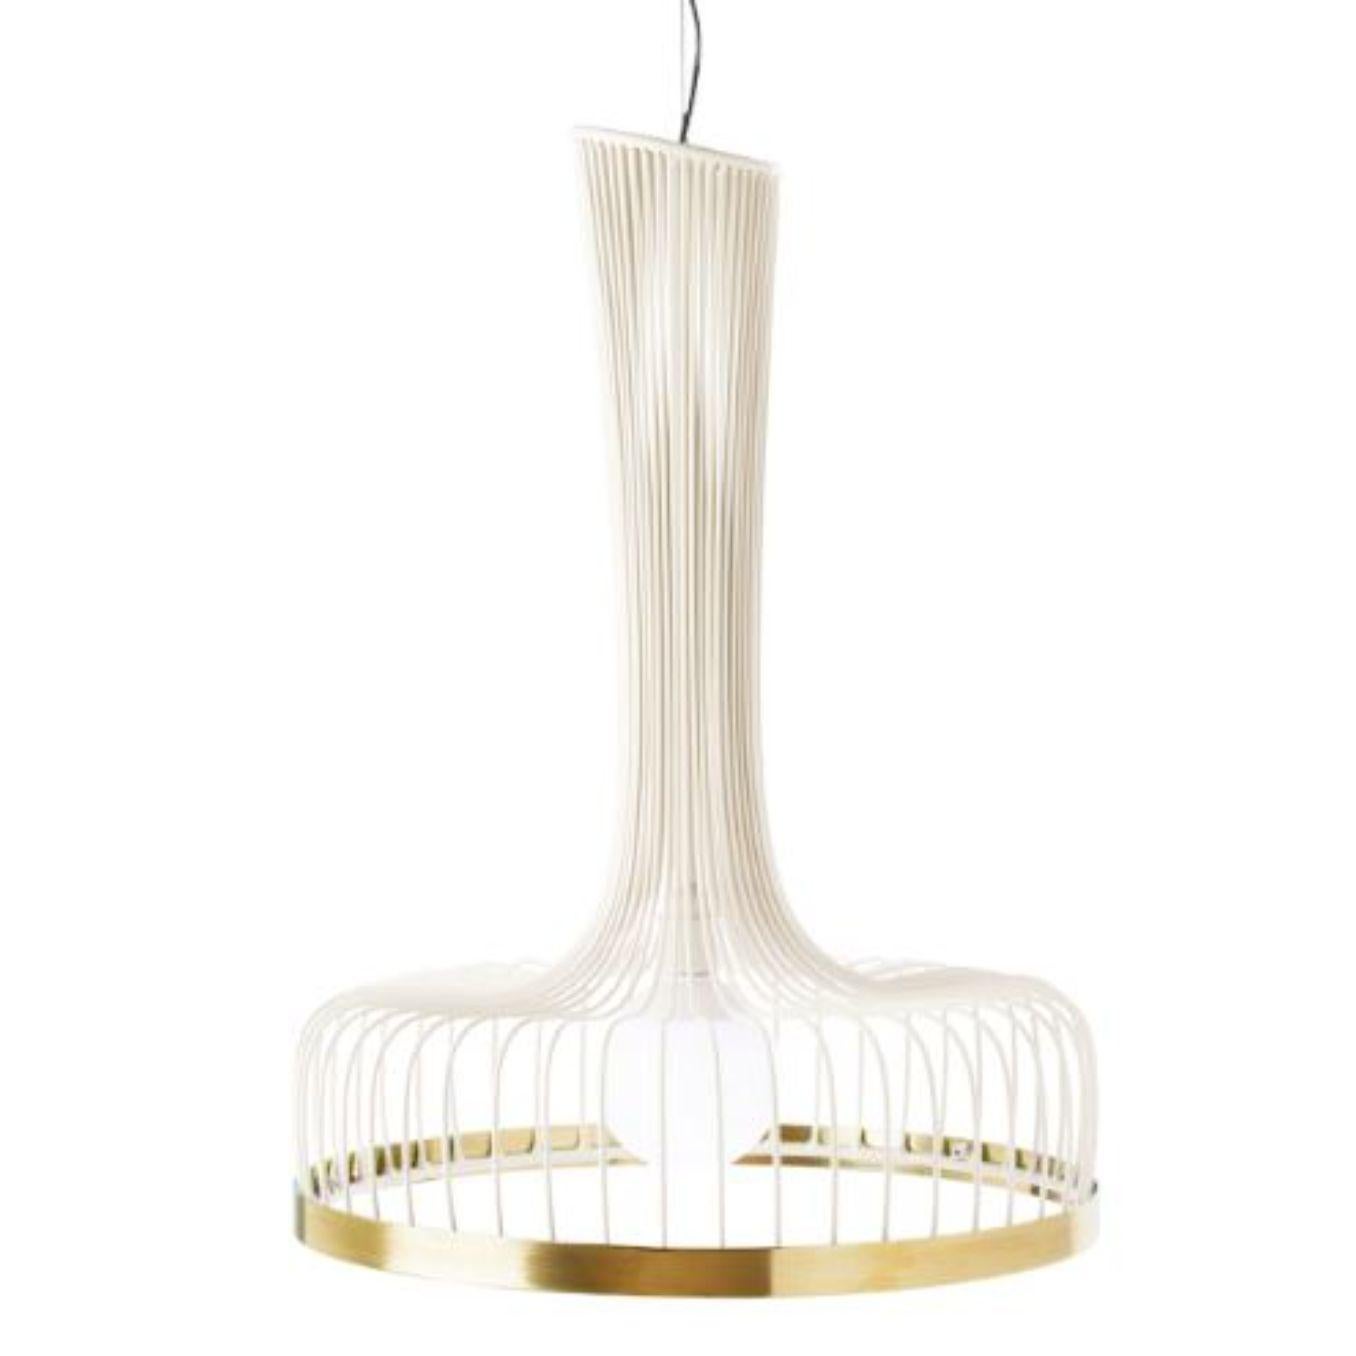 Ivory new spider suspension lamp with brass ring by Dooq.
Dimensions: W 52 x D 52 x H 70 cm
Materials: lacquered metal, polished or brushed metal, brass.
Also available in different colors and materials. 

Information:
230V/50Hz
E27/1x20W